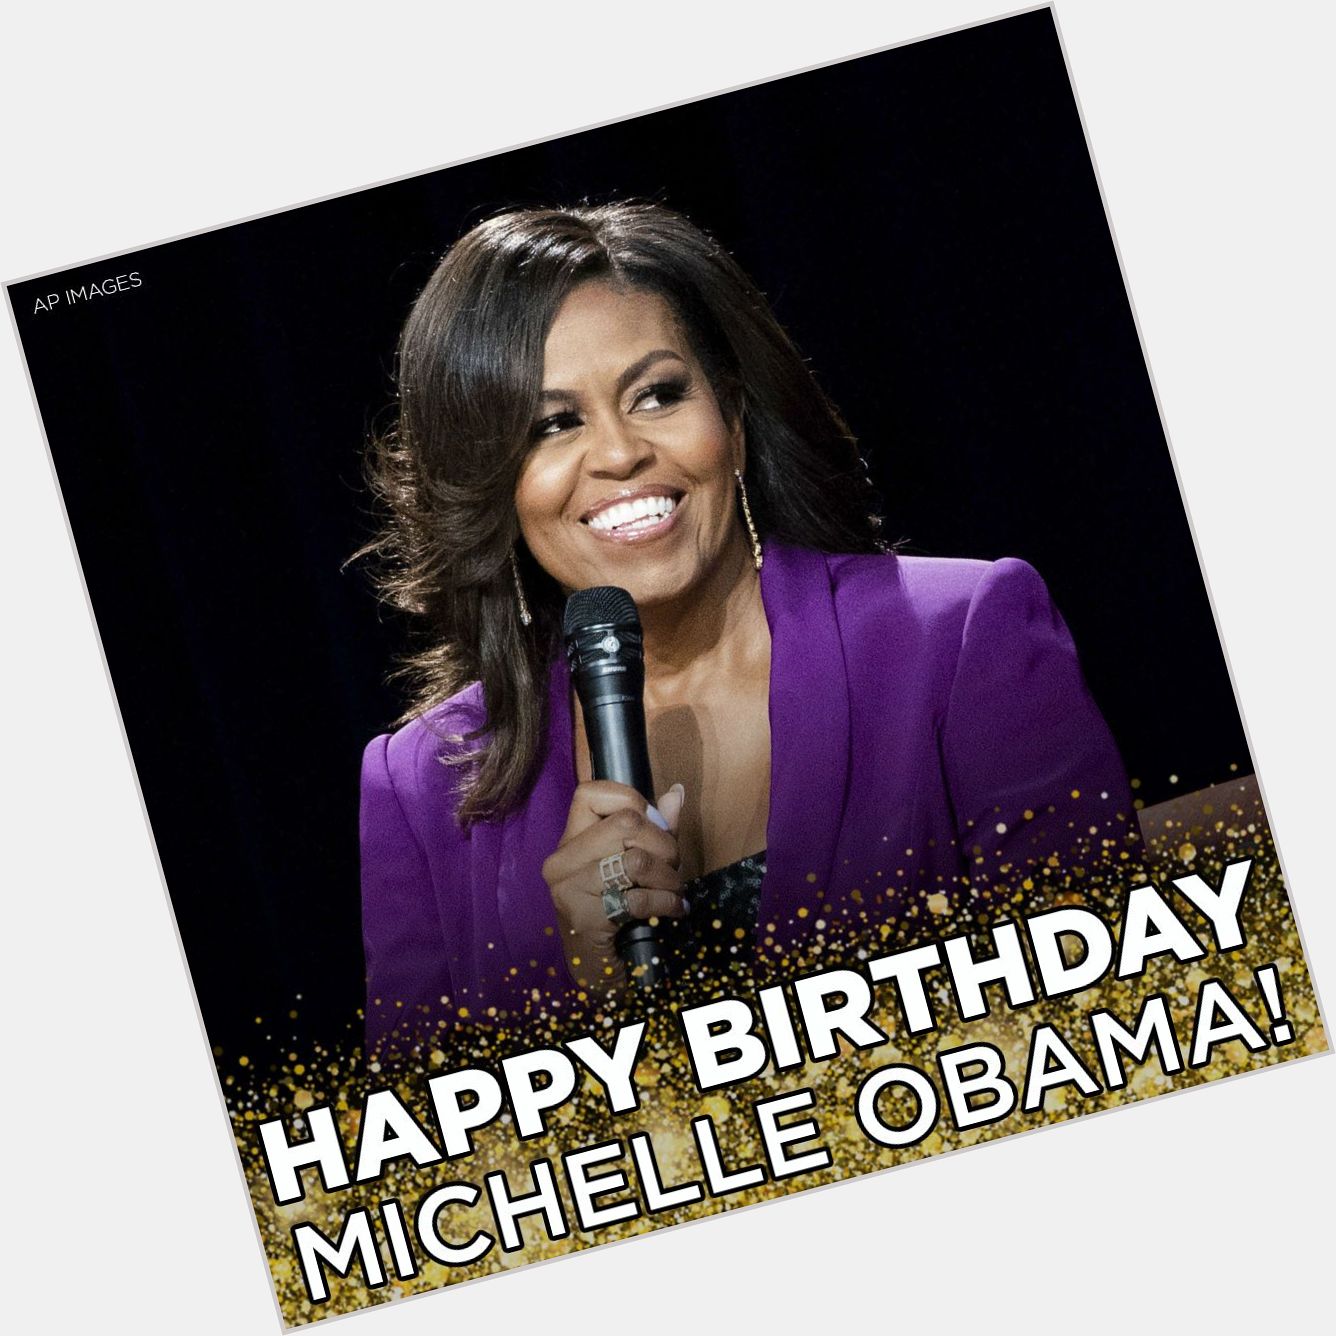 Join us in wishing a very happy birthday to former First Lady Michelle Obama! 